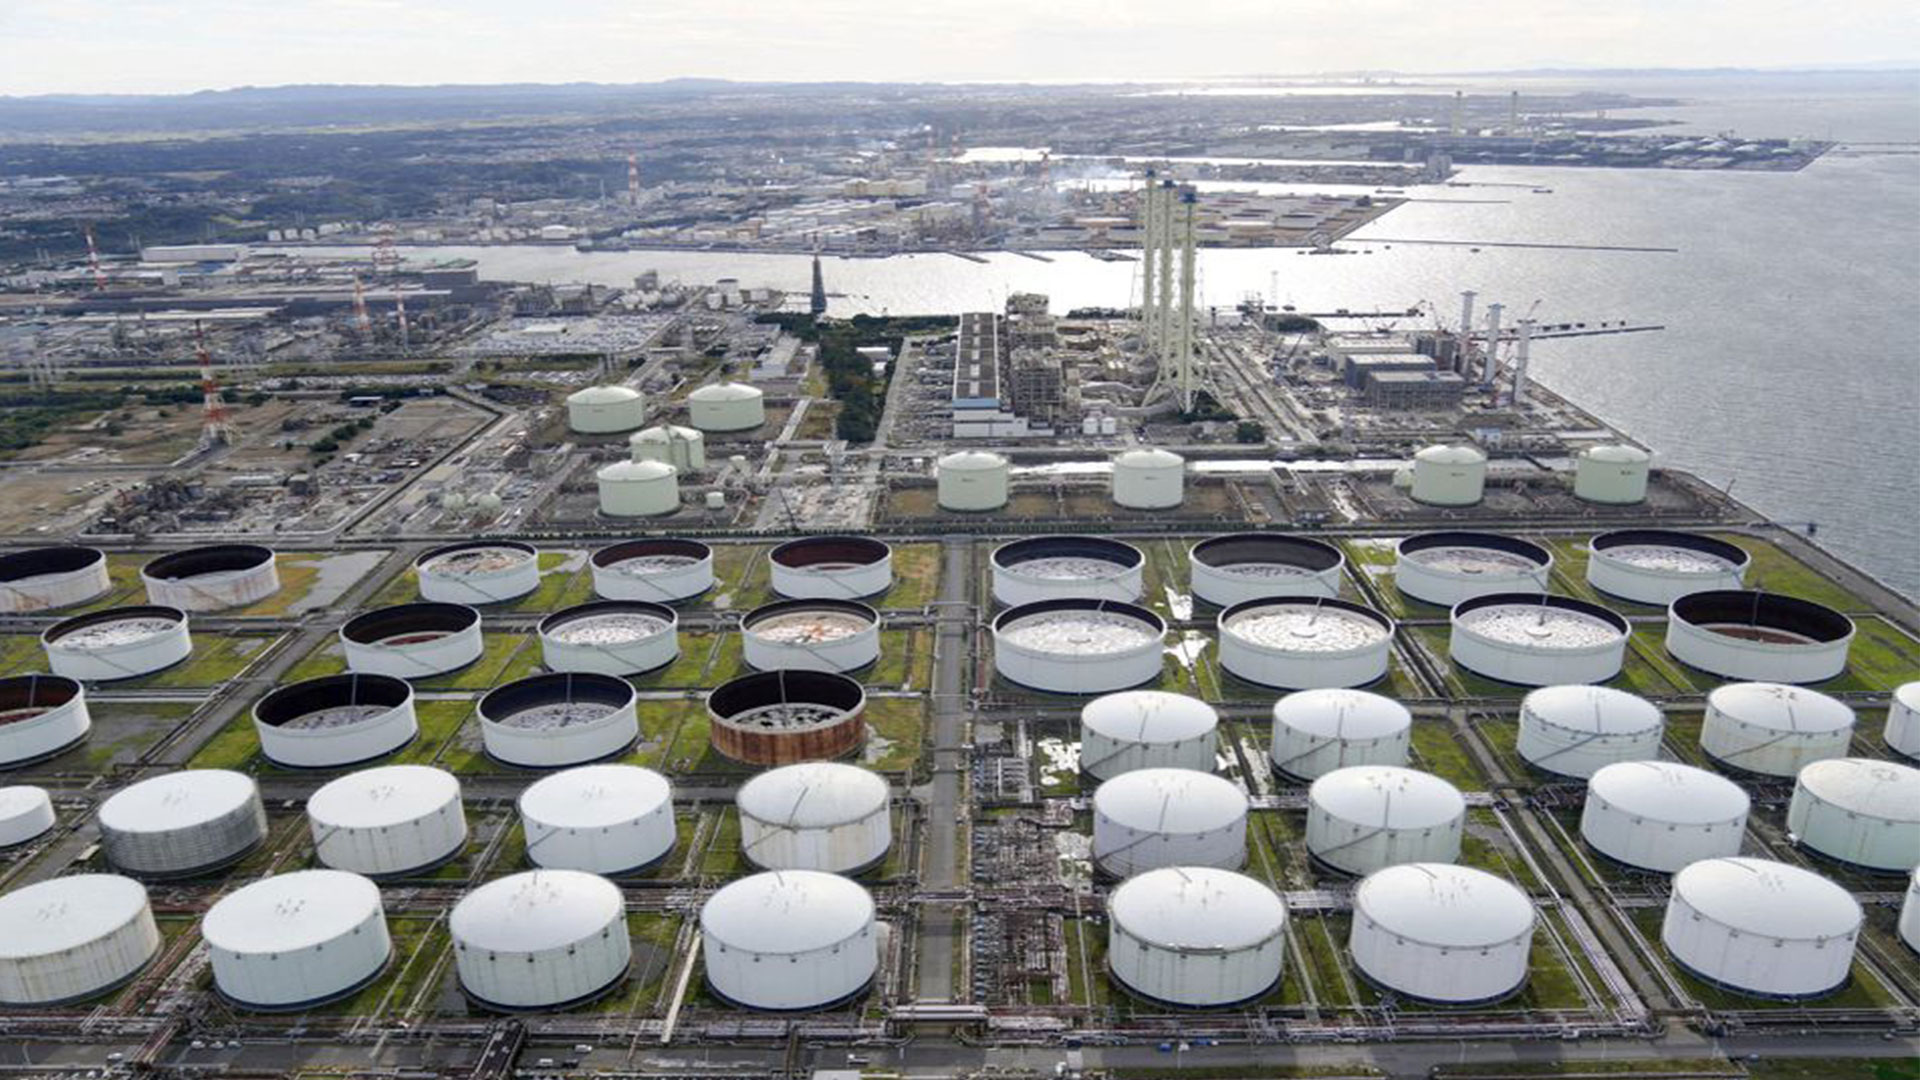  An aerial view shows an Idemitsu Kosan Co. oil facility in Ichihara, east of Tokyo, Japan November 12, 2021, in this photo taken by Kyodo. Mandatory credit Kyodo/via REUTERS